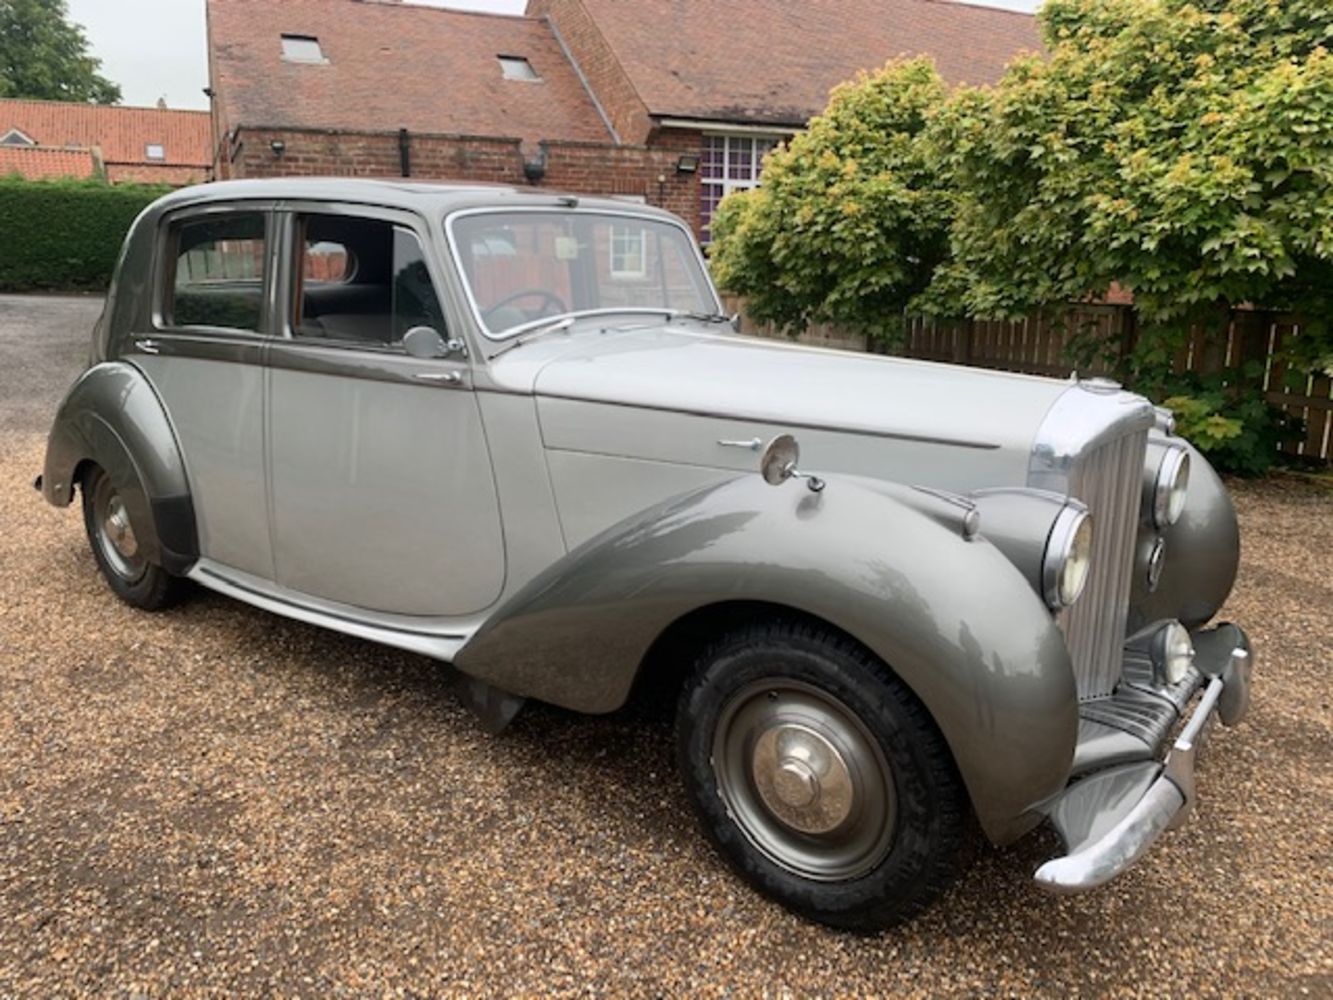 2nd OCTOBER 2020 CLASSIC VEHICLES AUCTION  - LOTS 1-100